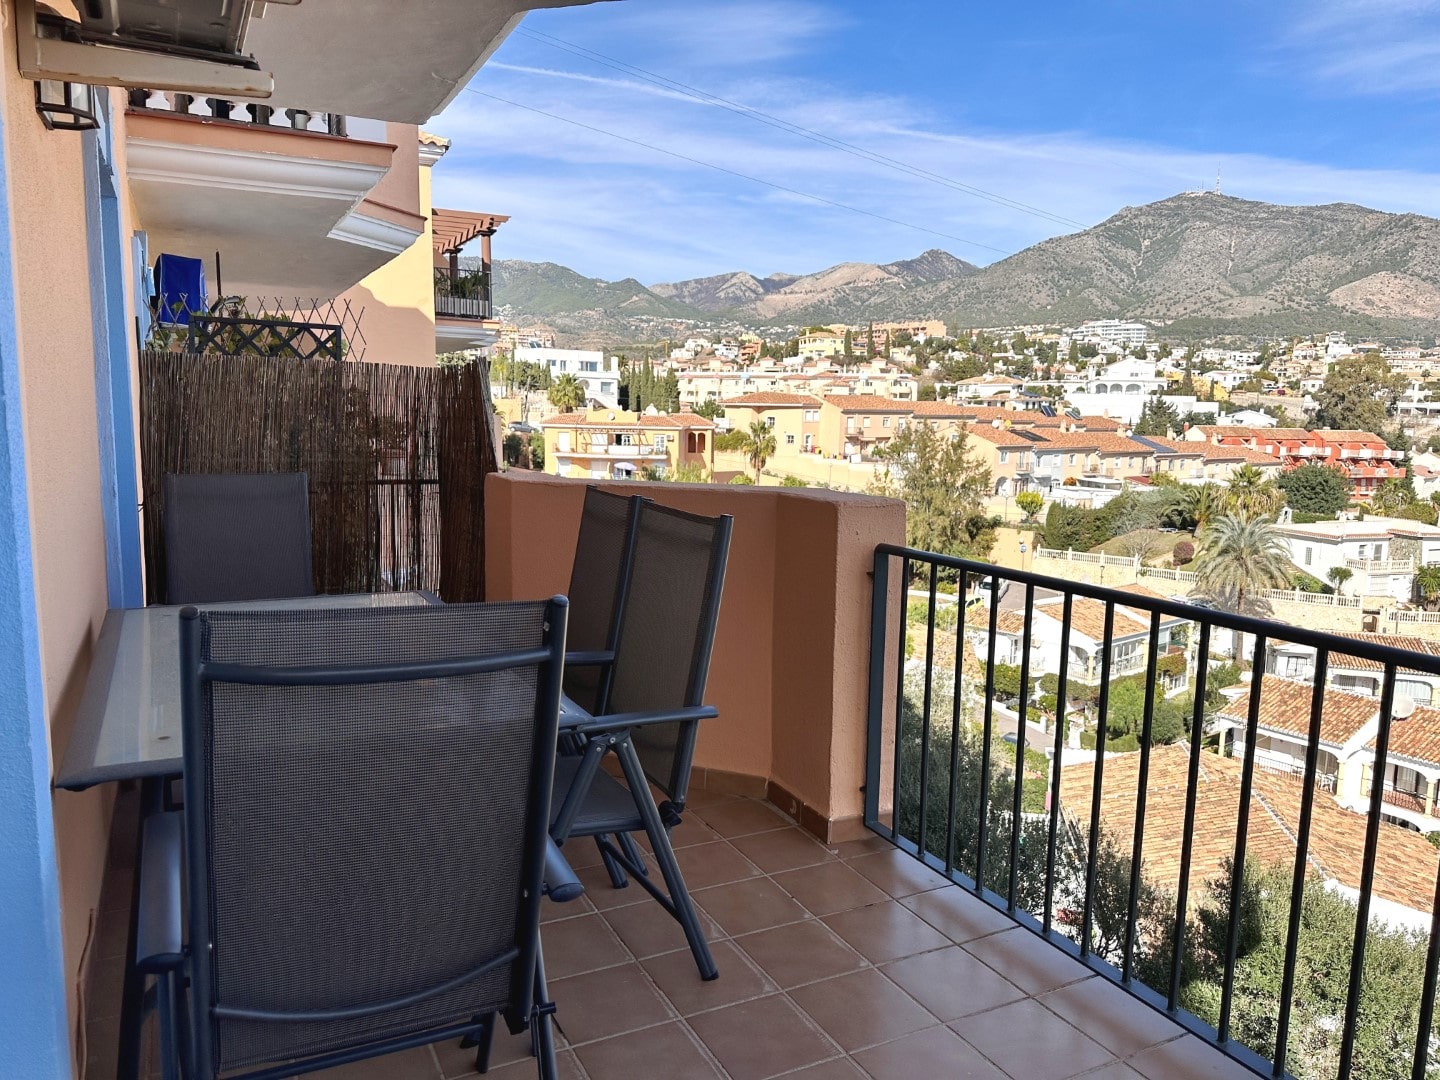 Bright, pleasant corner apartment with fantastic views of both sea and mountains